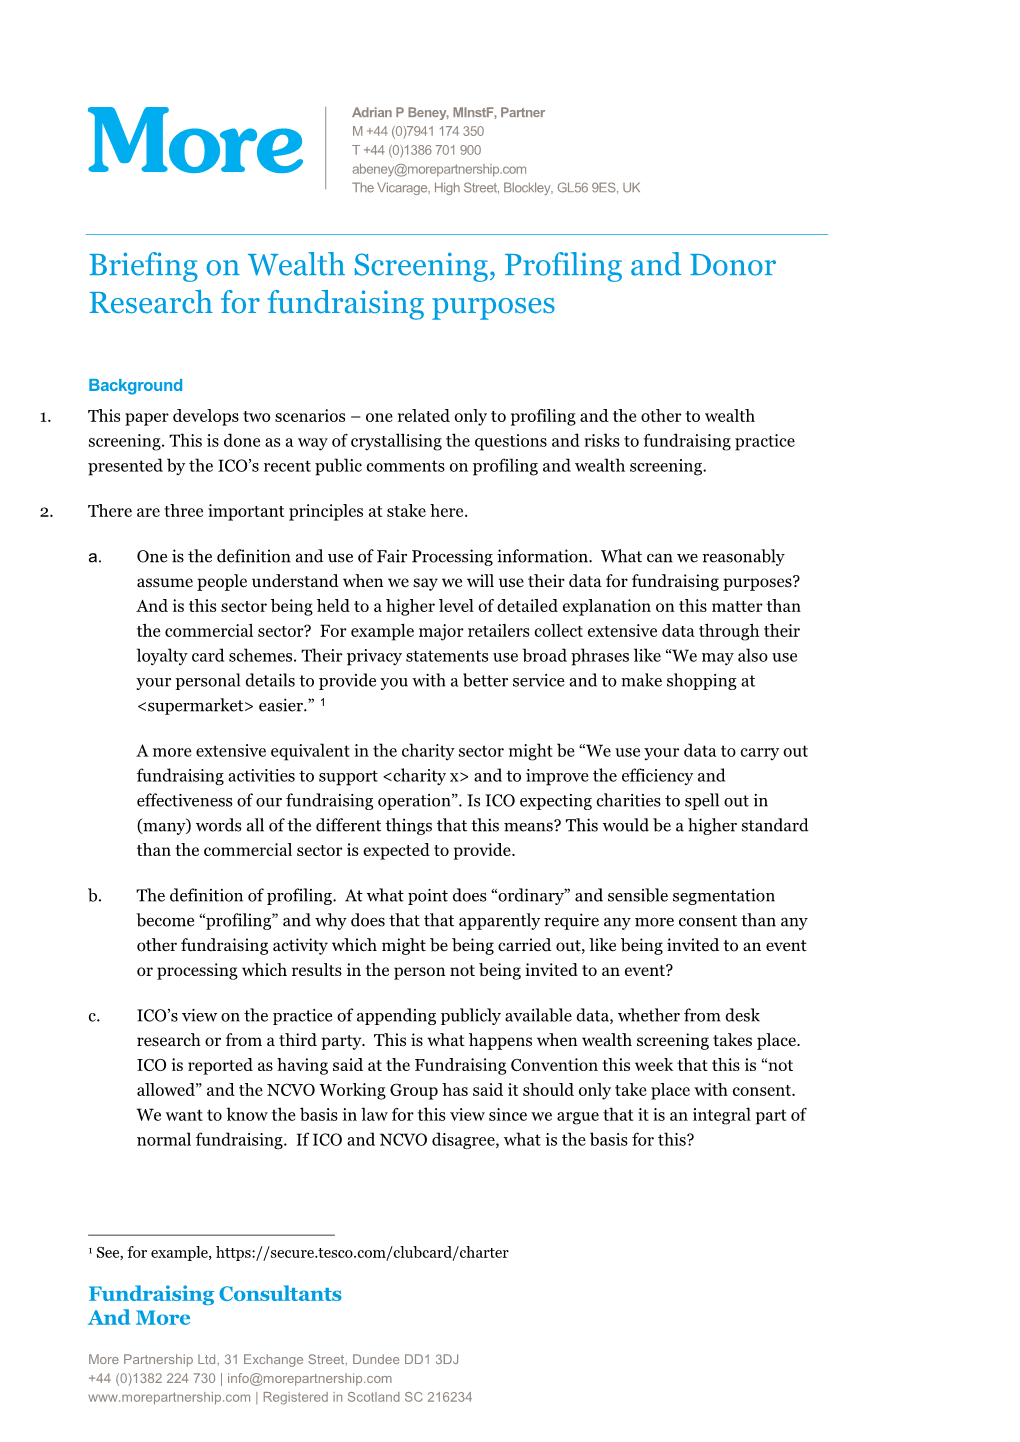 Briefing on Wealth Screening, Profiling and Donor Research for Fundraising Purposes